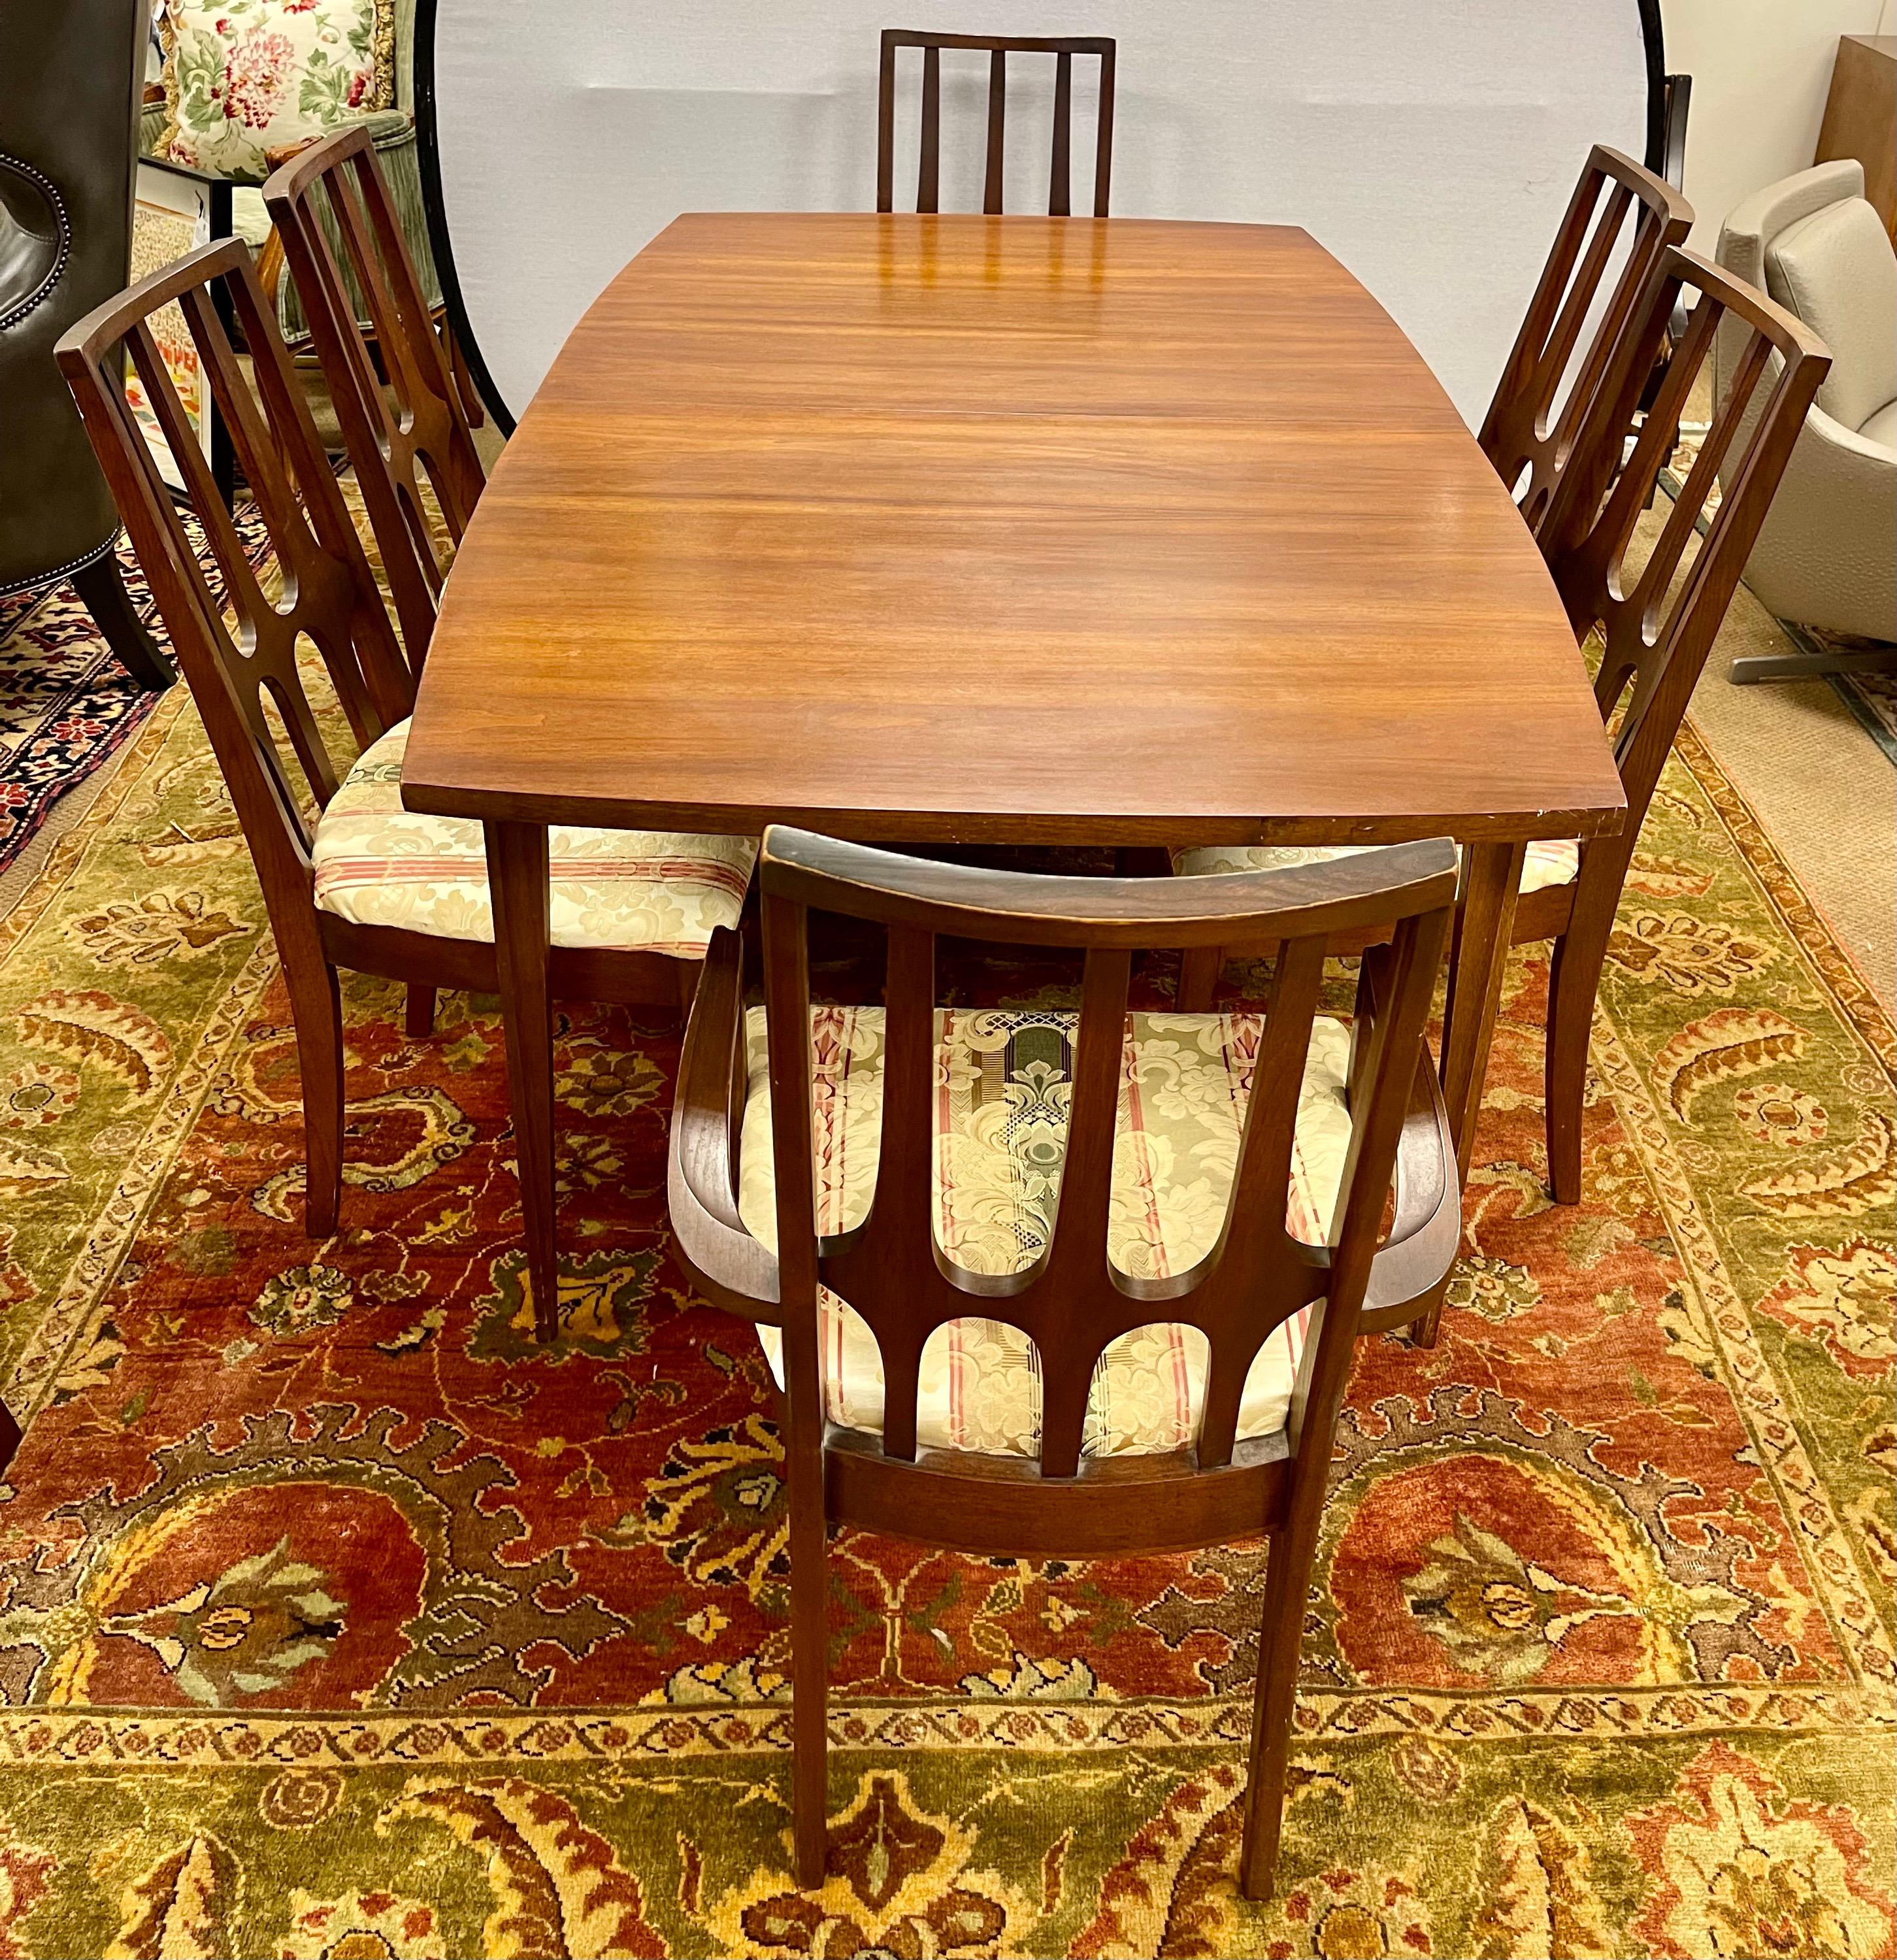 Iconic Broyhill walnut dining room table with rare and sought after boat shaped top that comes with six matching chairs. Circa 1962. There are four side chairs and two arm chairs. The table is expandable with one leaf that can expand the table by